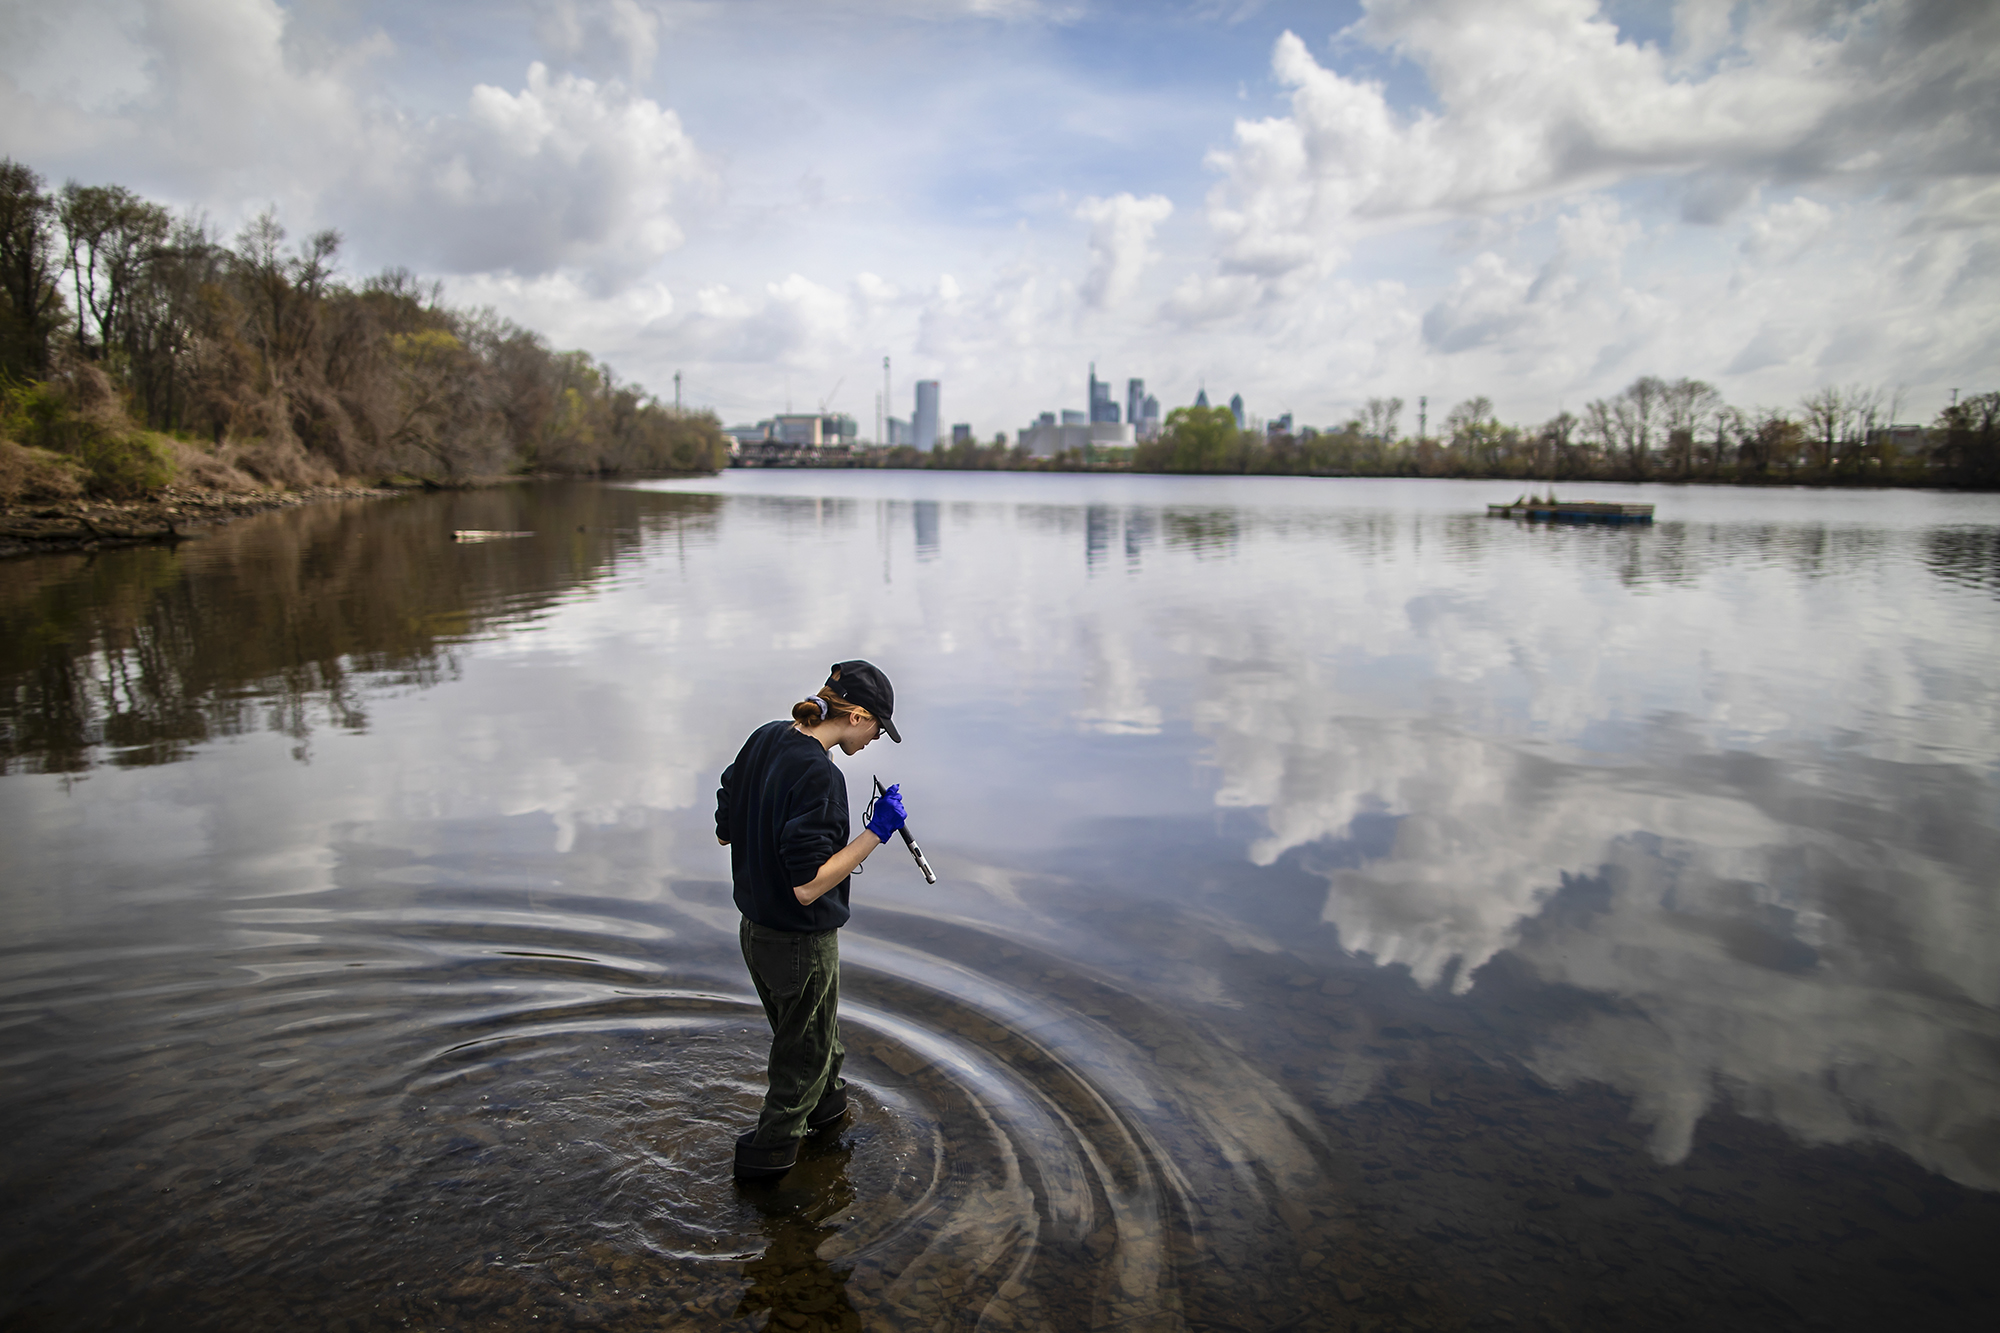 With the Philadelphia skyline in the background, a student in waders and a baseball cap holds a piece of scientific equipment while standing in the Schuylkill River and looking down